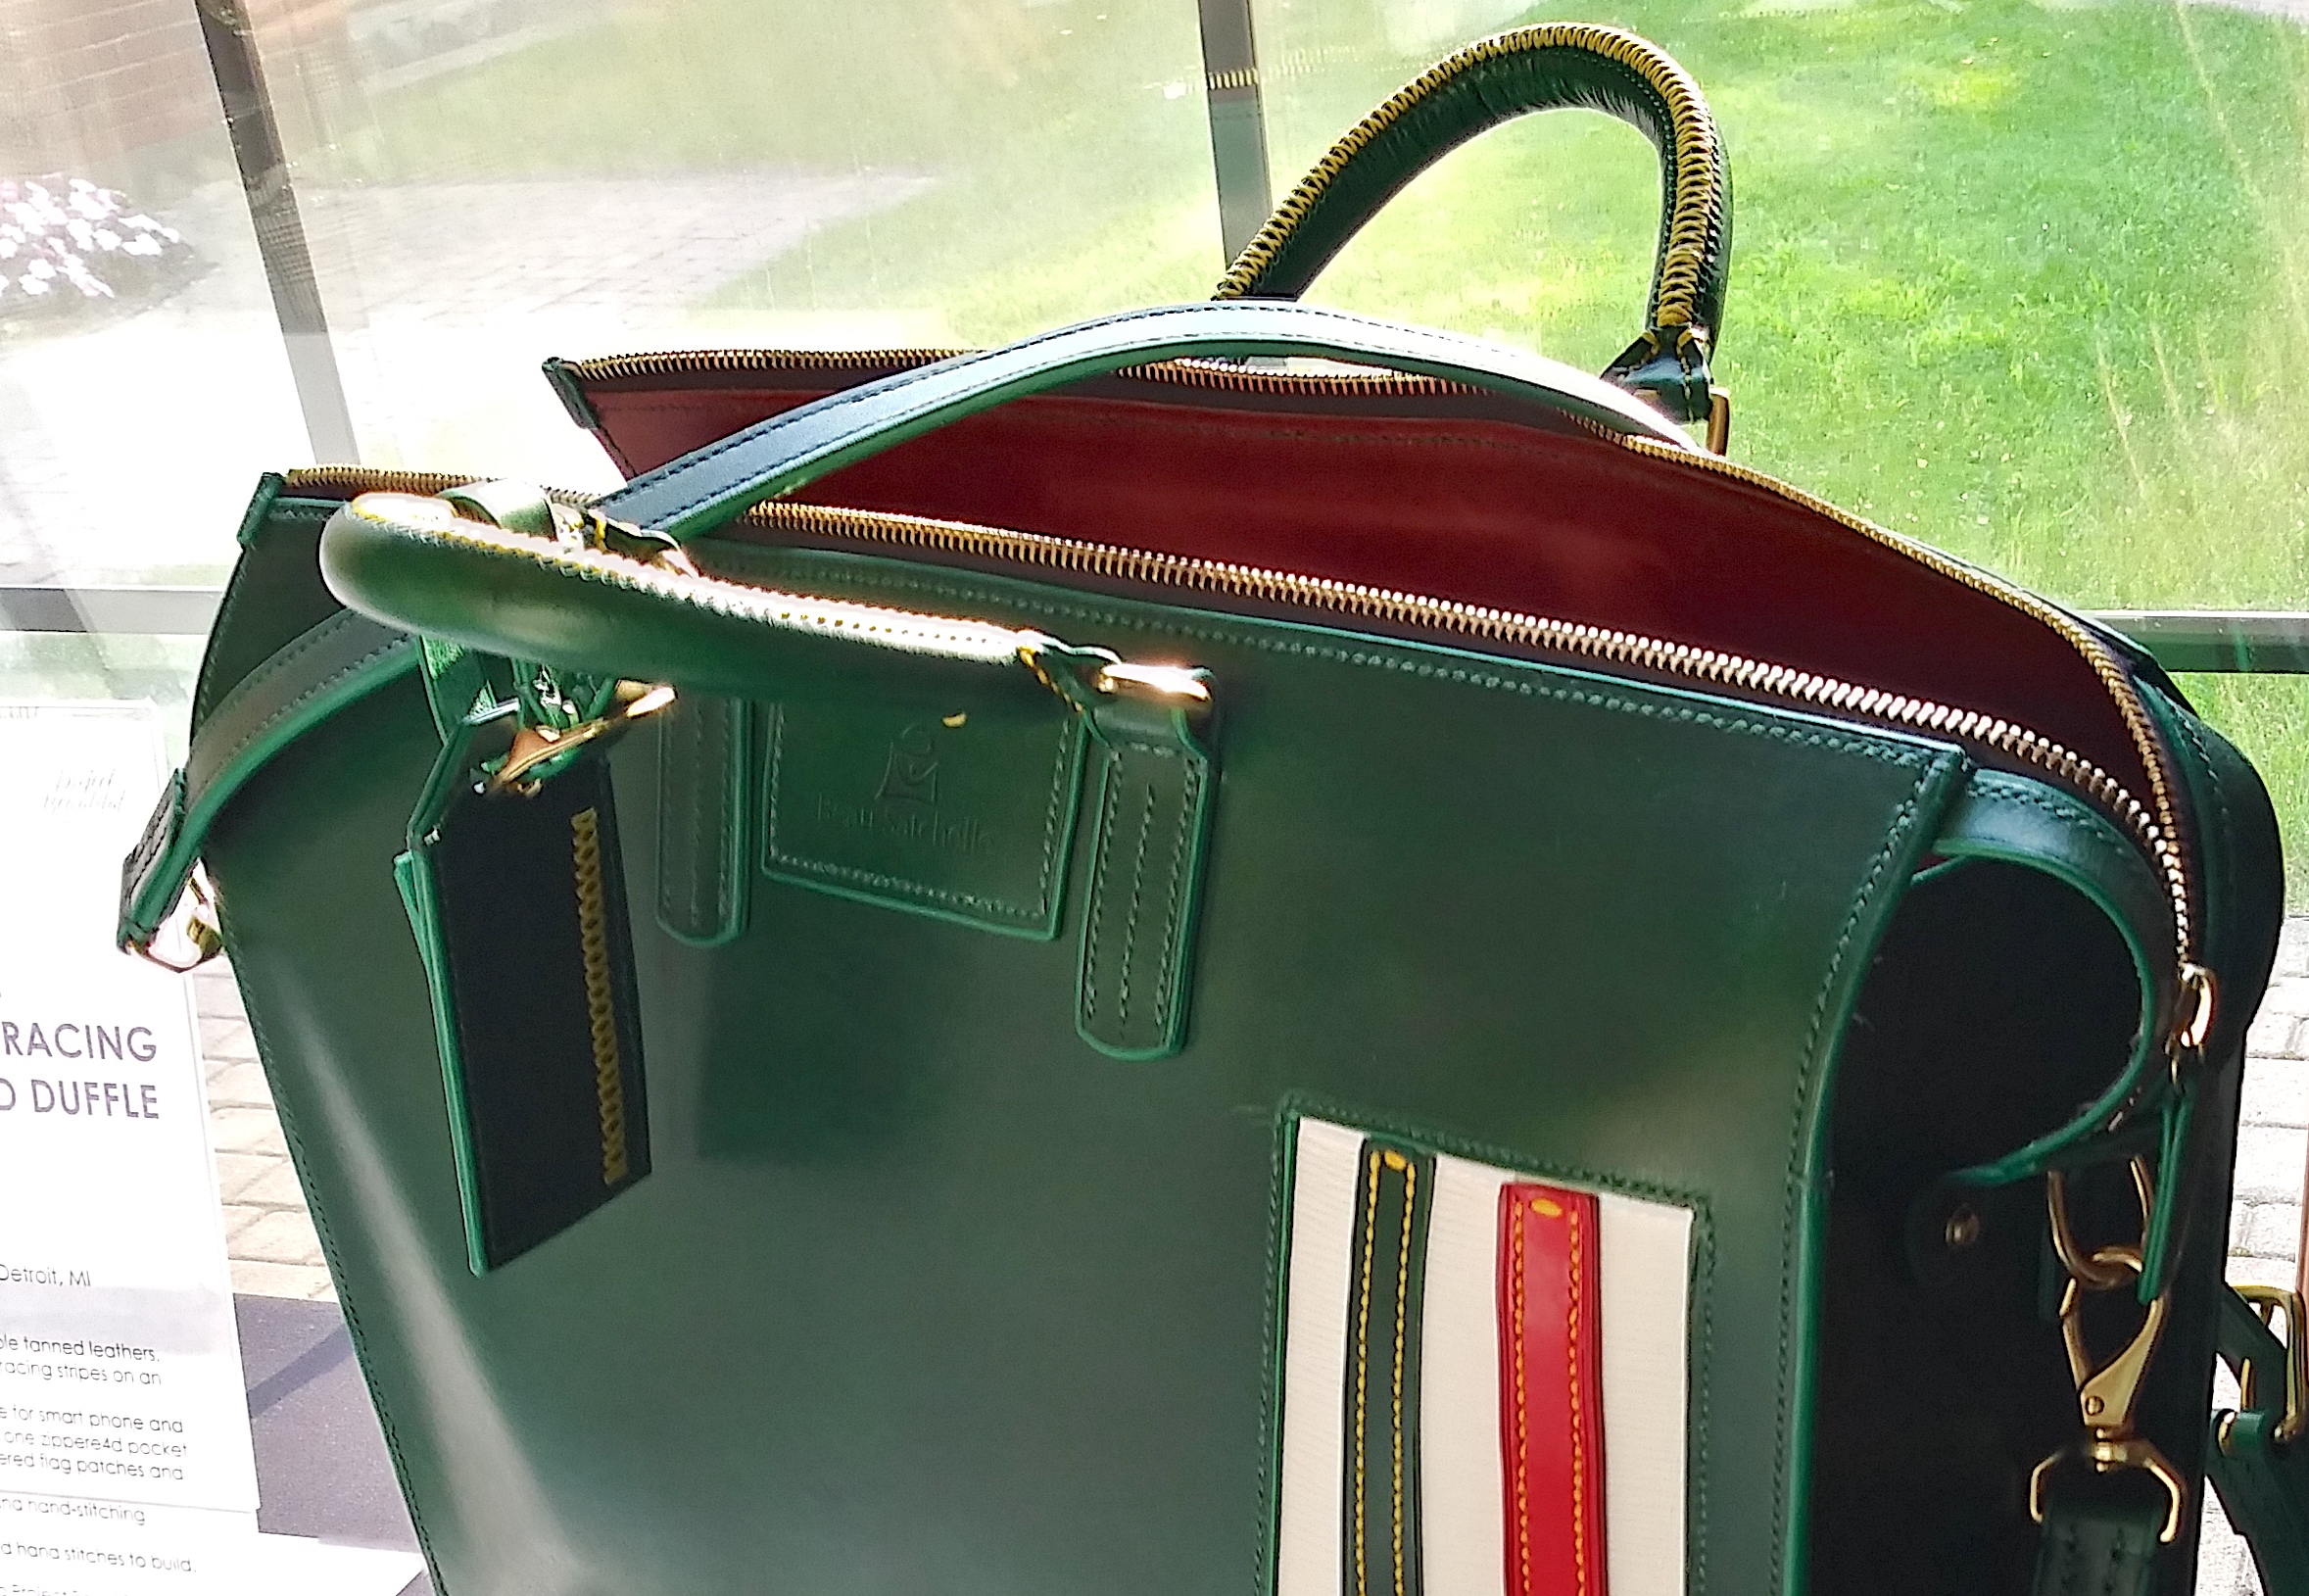 You are currently viewing Product Reveal: Italian Racing Inspired Duffle Bag